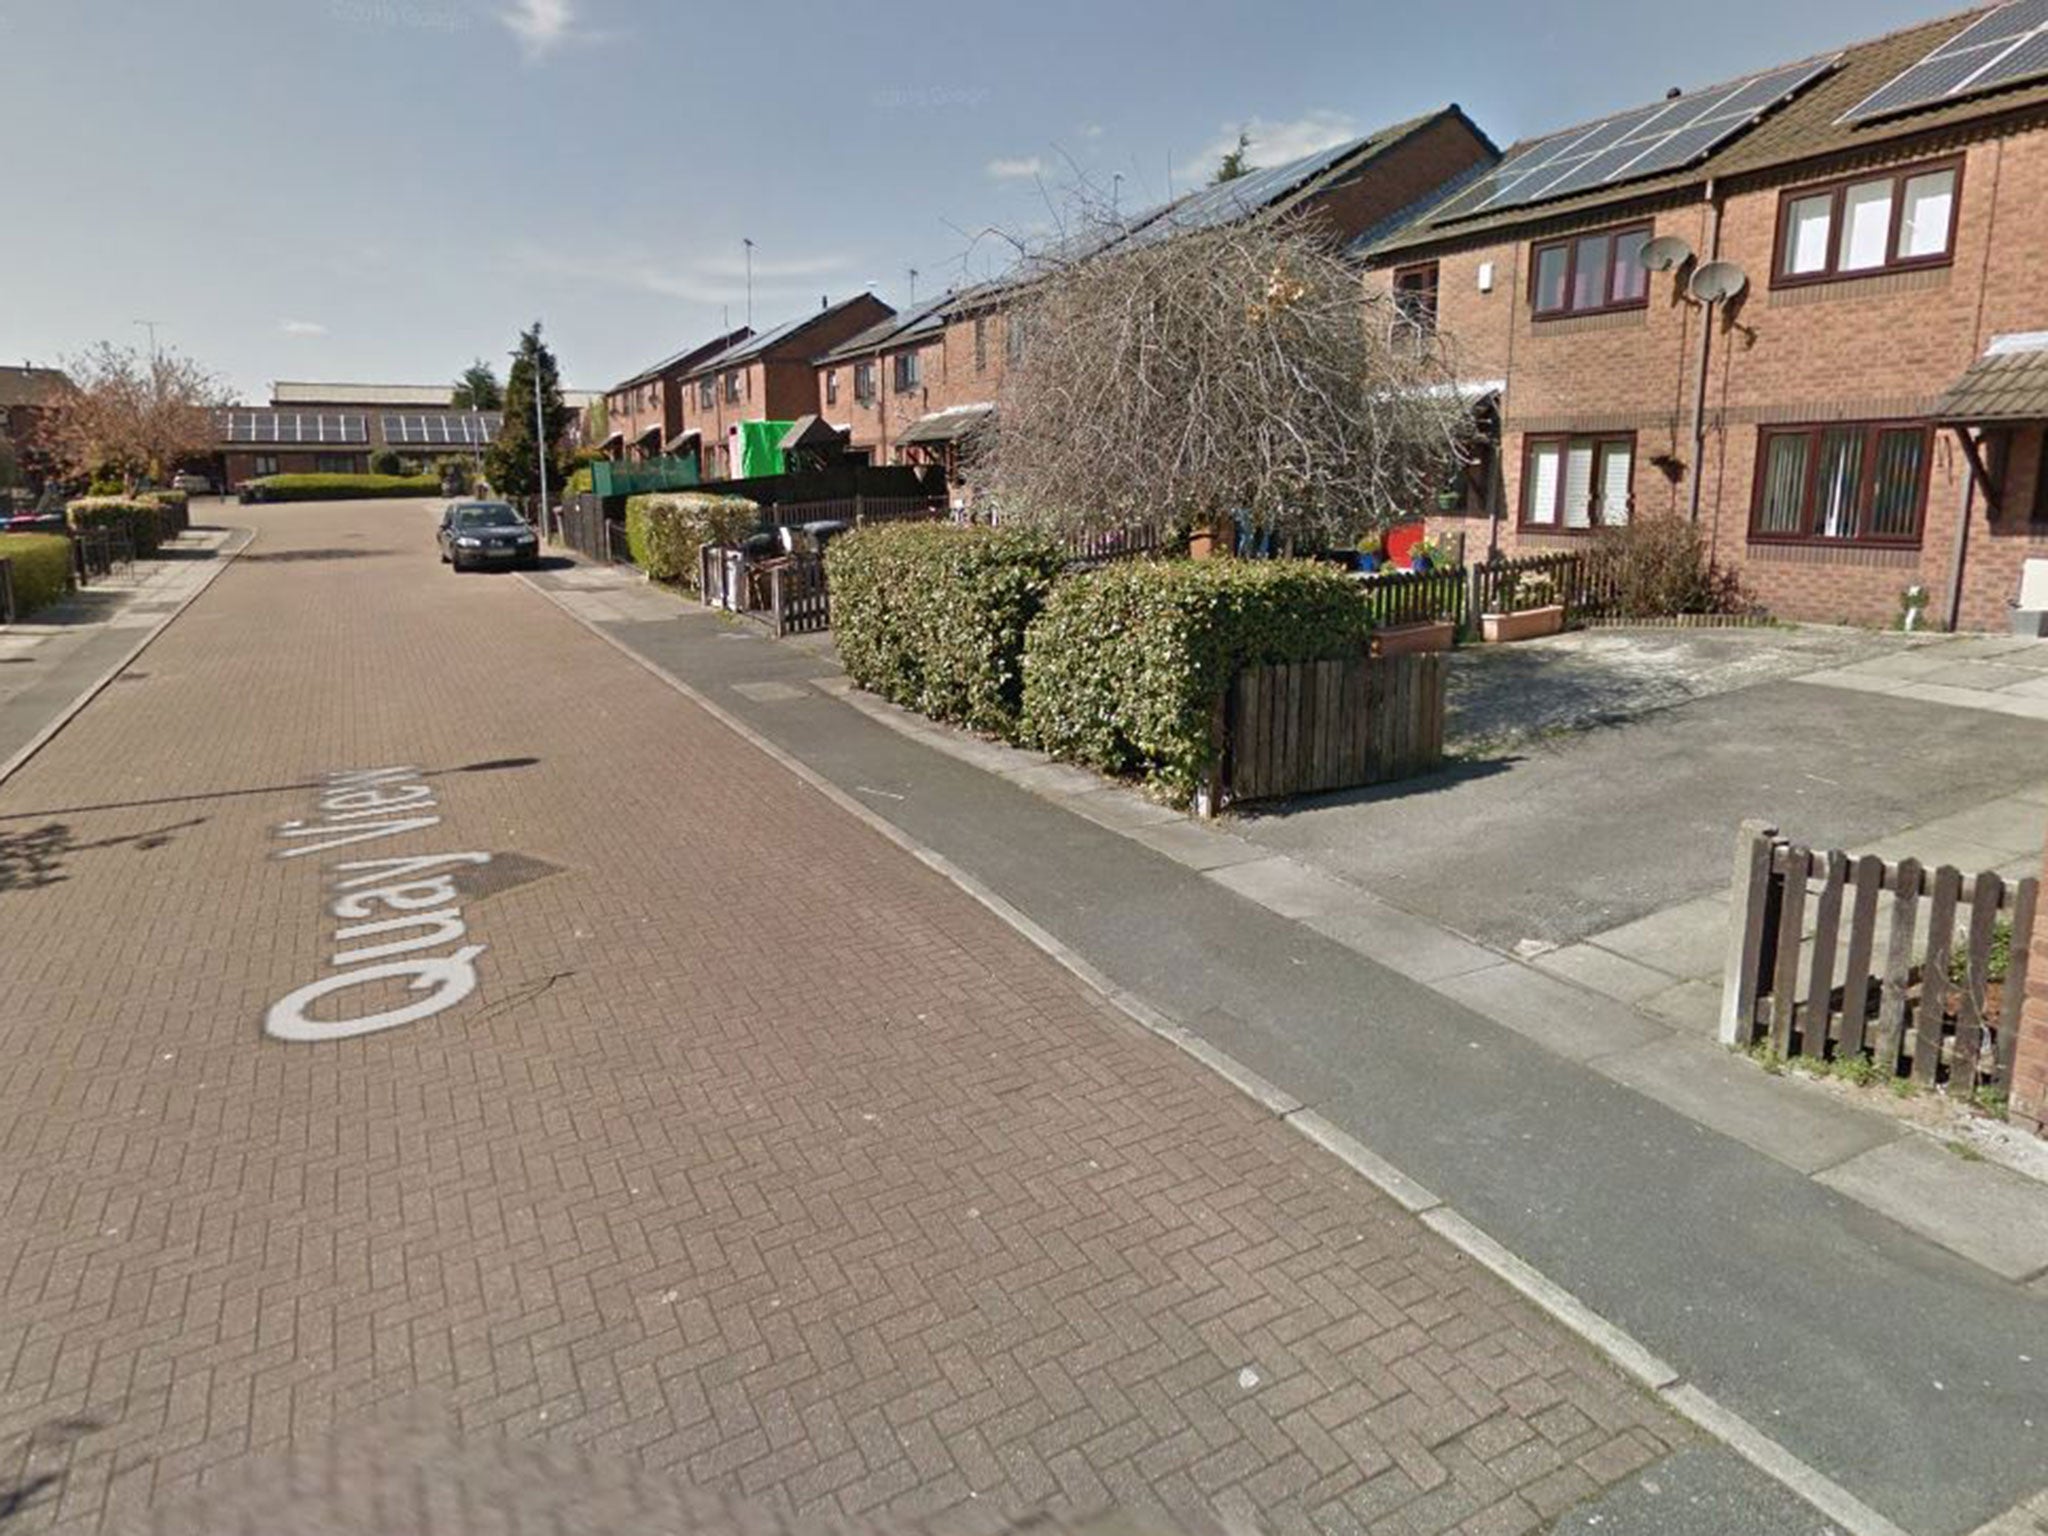 Shots were fired at a house on Quayview in Salford Quays, no one was injured